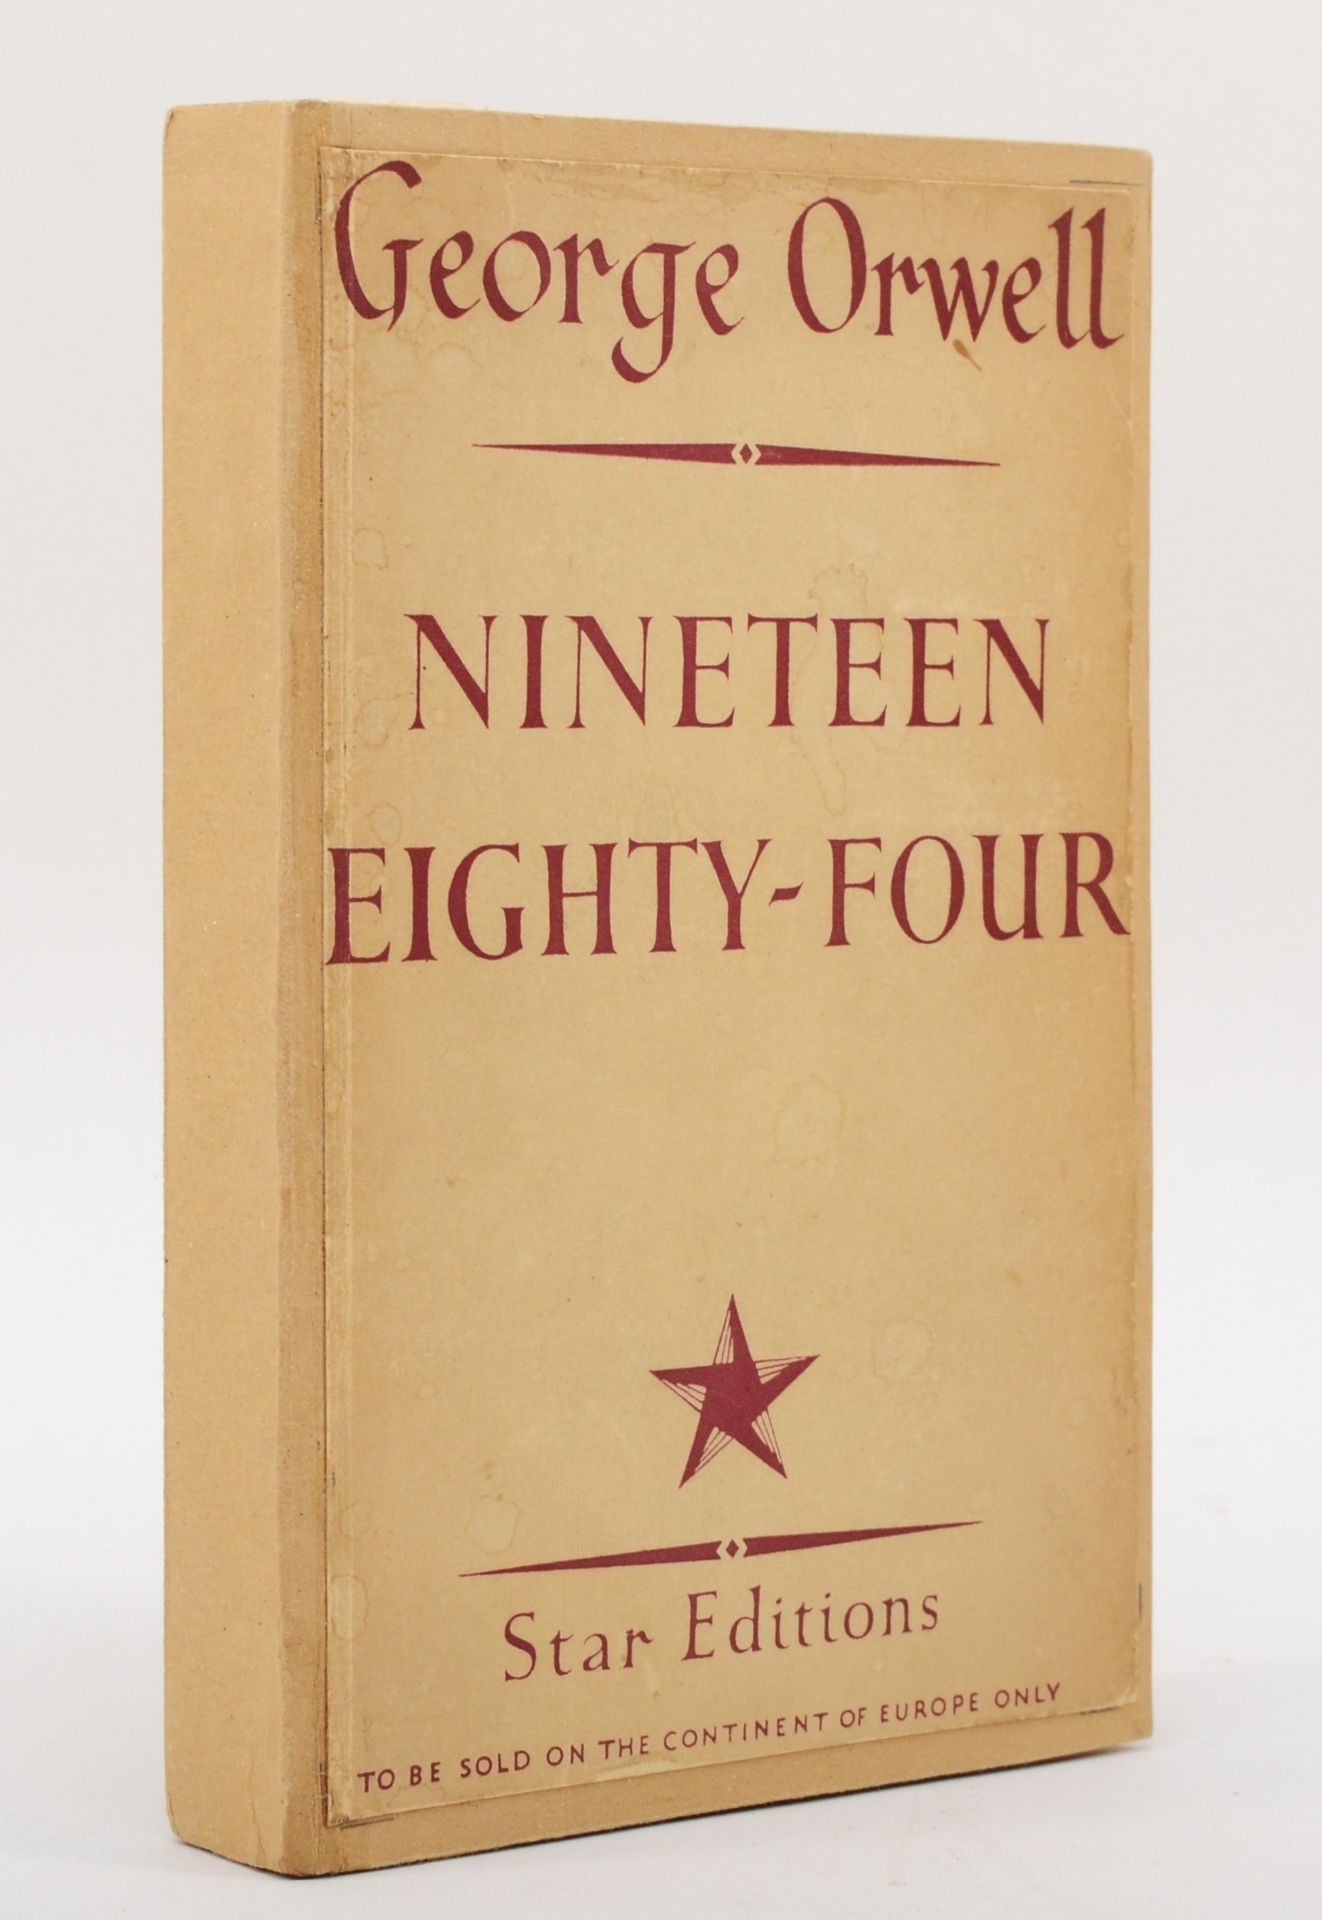 WITHDRAWN FROM AUCTION KOESTLER, Arthur & ORWELL, George. Nineteen Eighty-Four. London. - Image 4 of 10